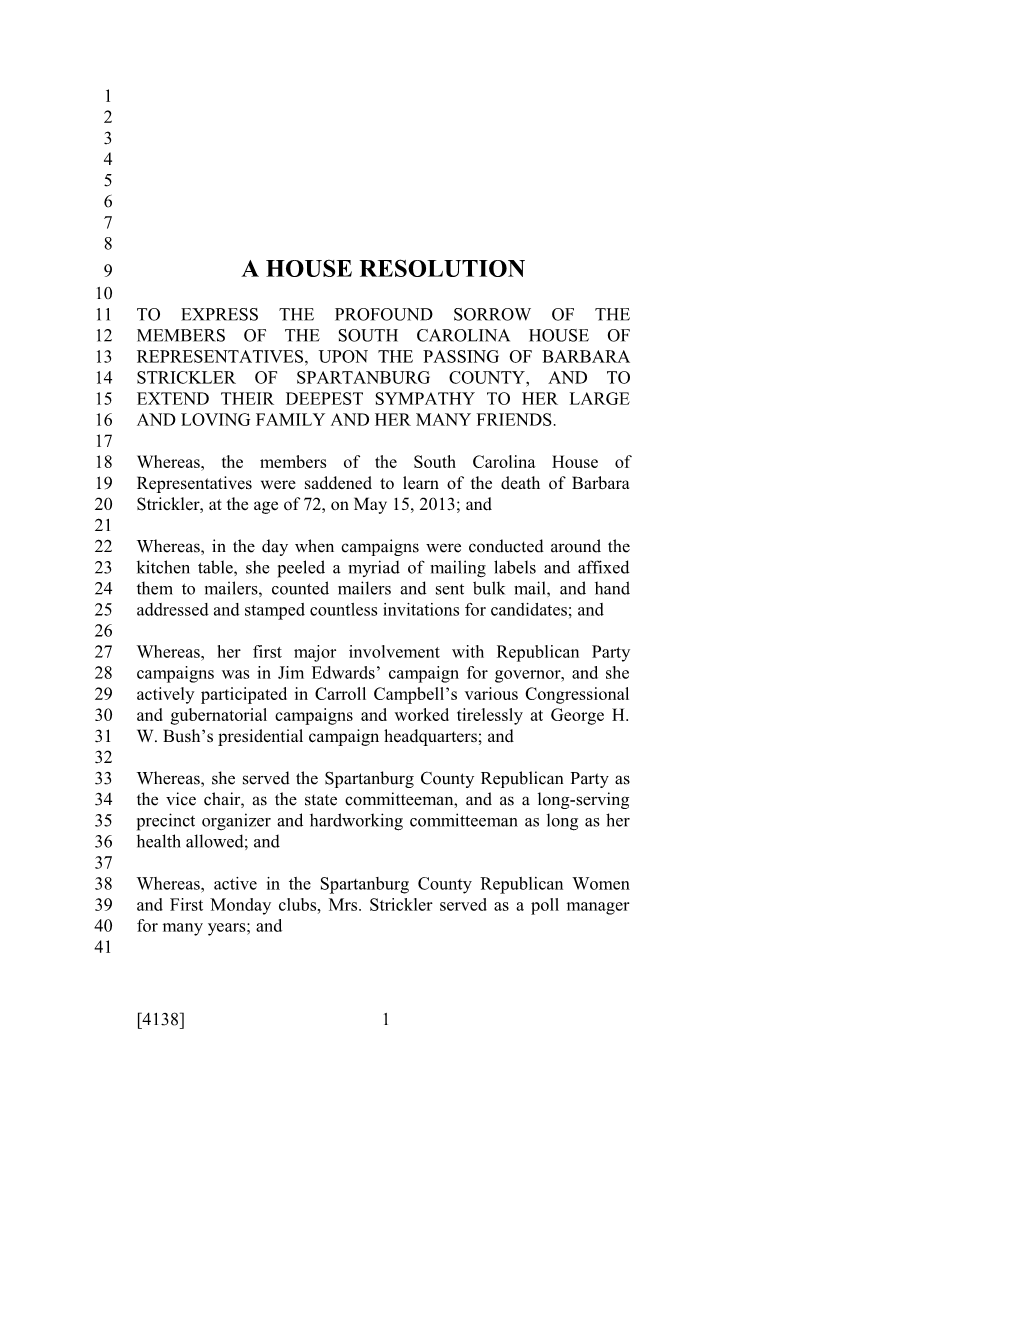 A House Resolution s17